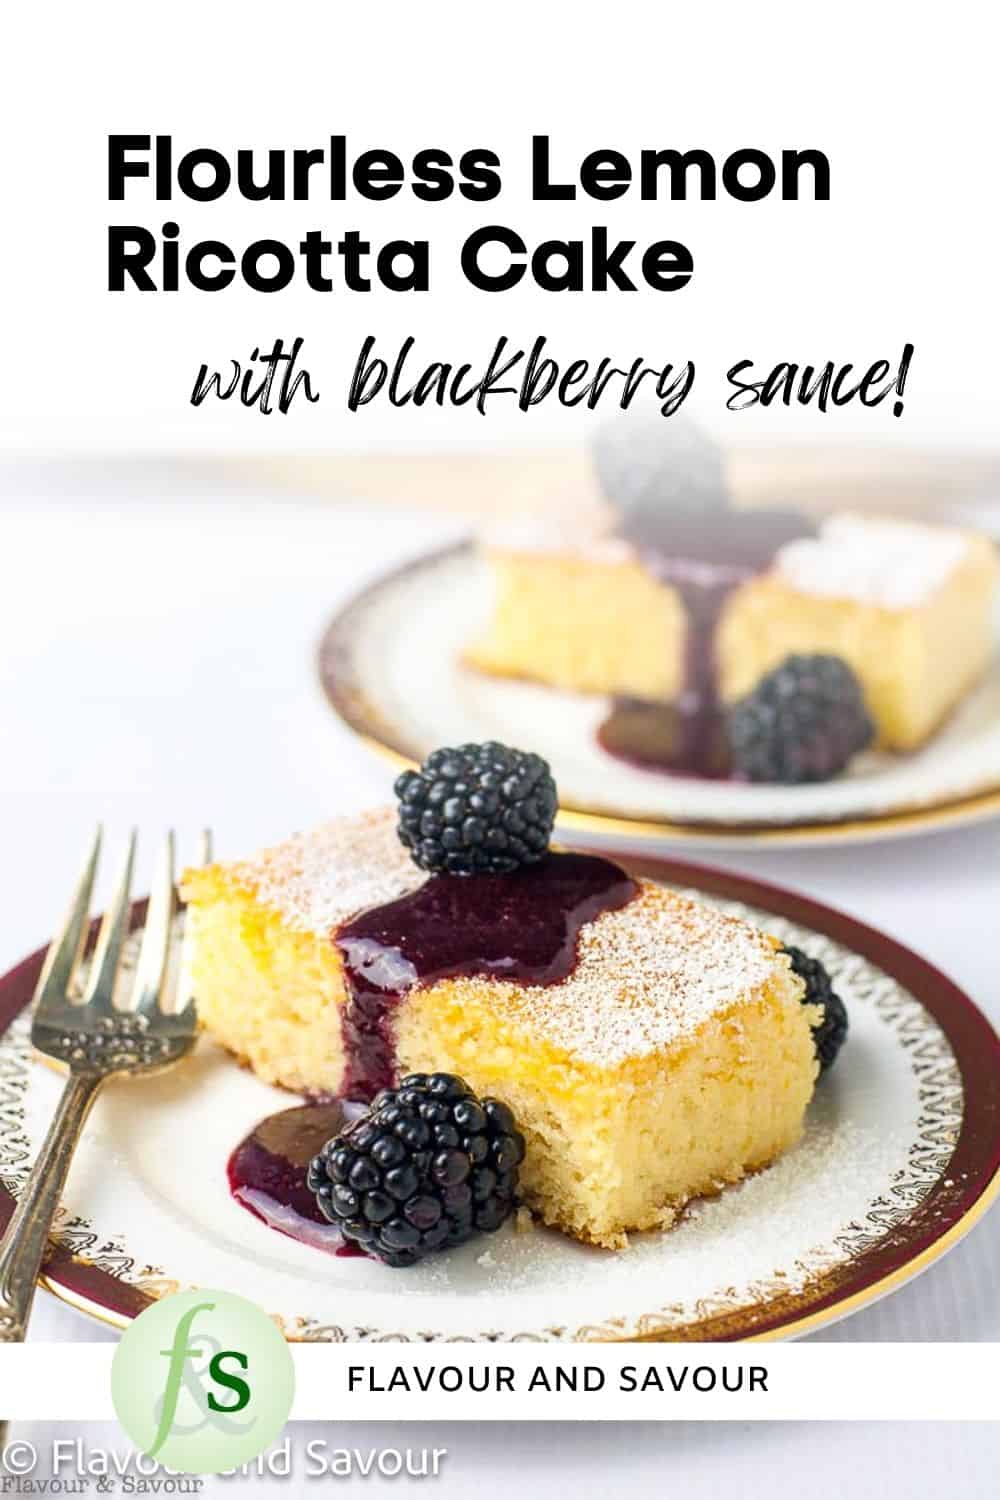 A slice of gluten-free lemon ricotta cake on a plate with blackberry sauce and fresh blackberries.